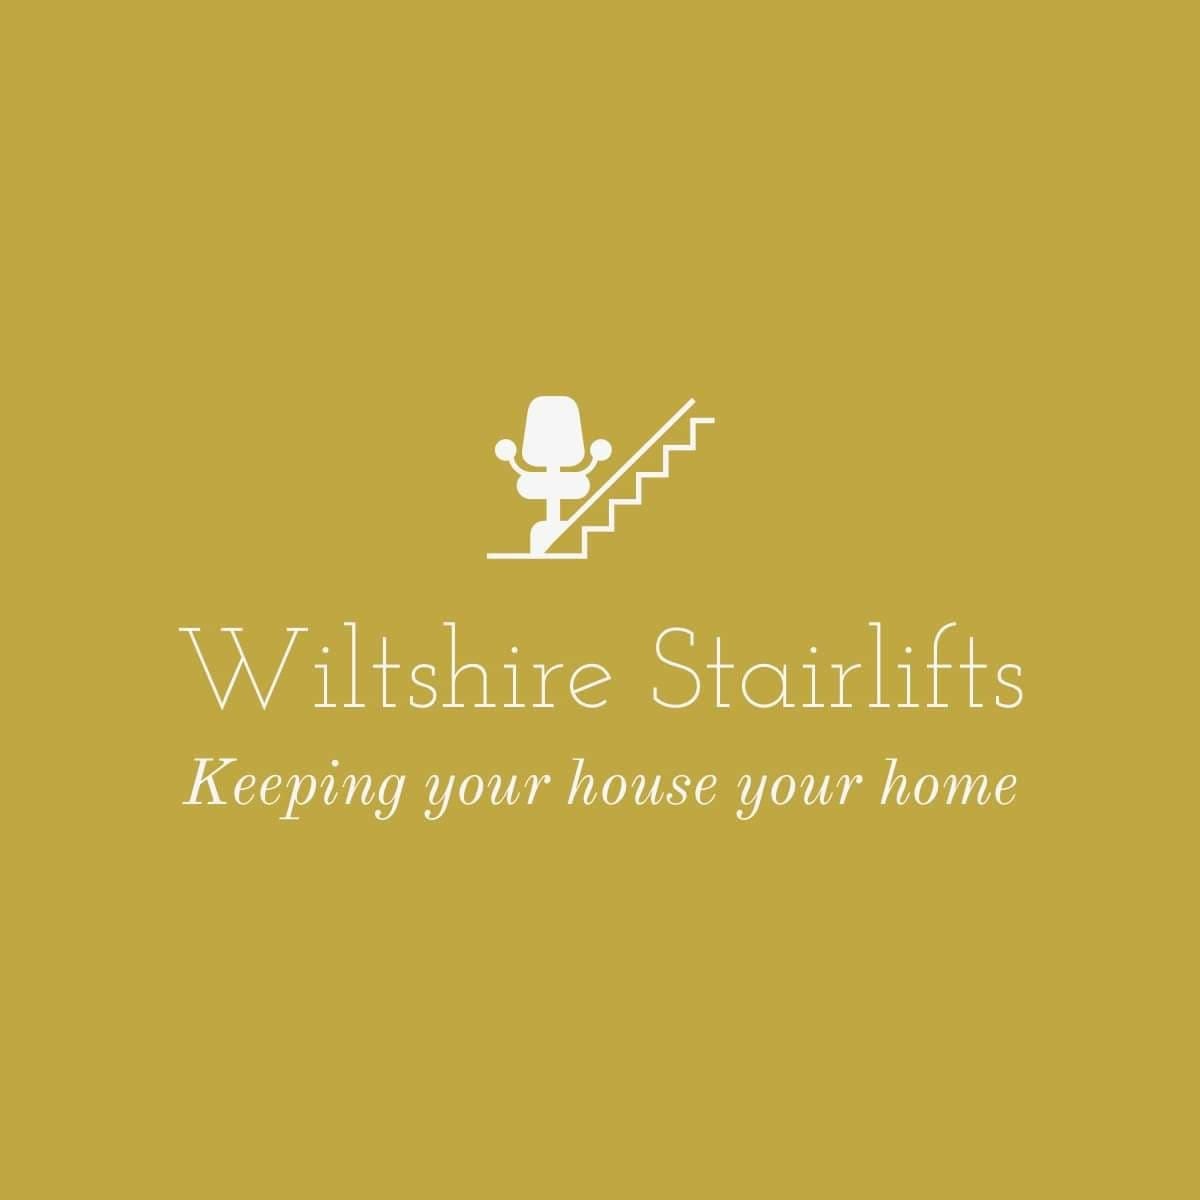 Wiltshire Stairlifts